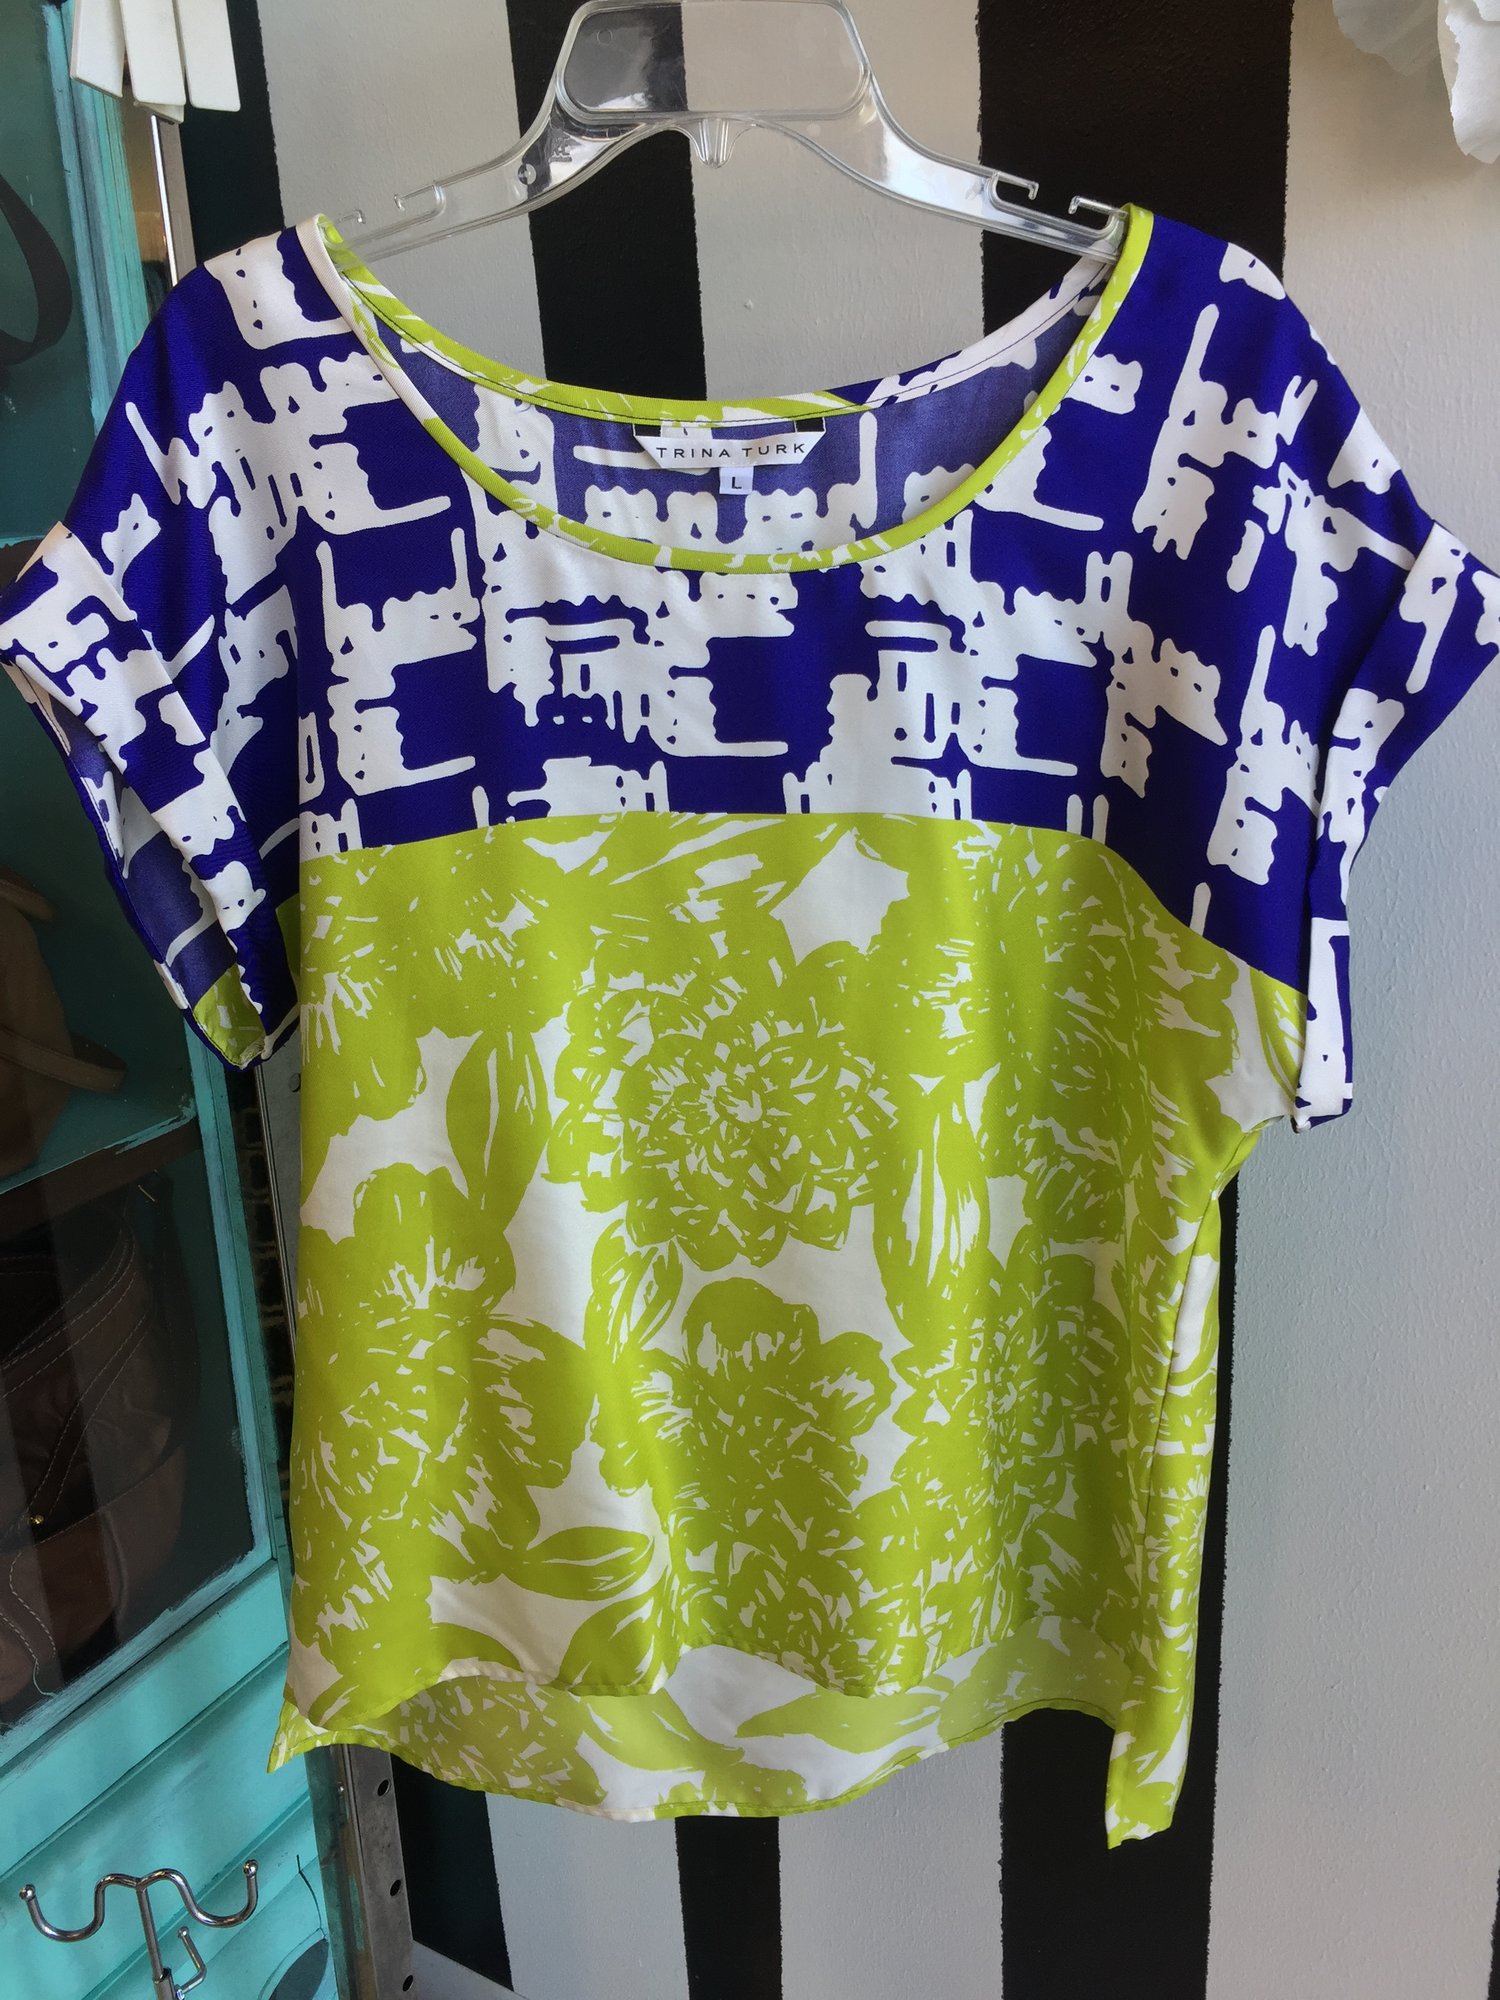 Trina Turk short sleeved top, size large. Green, navy and white silk. Dry clean only. Like new, retail approx: $188